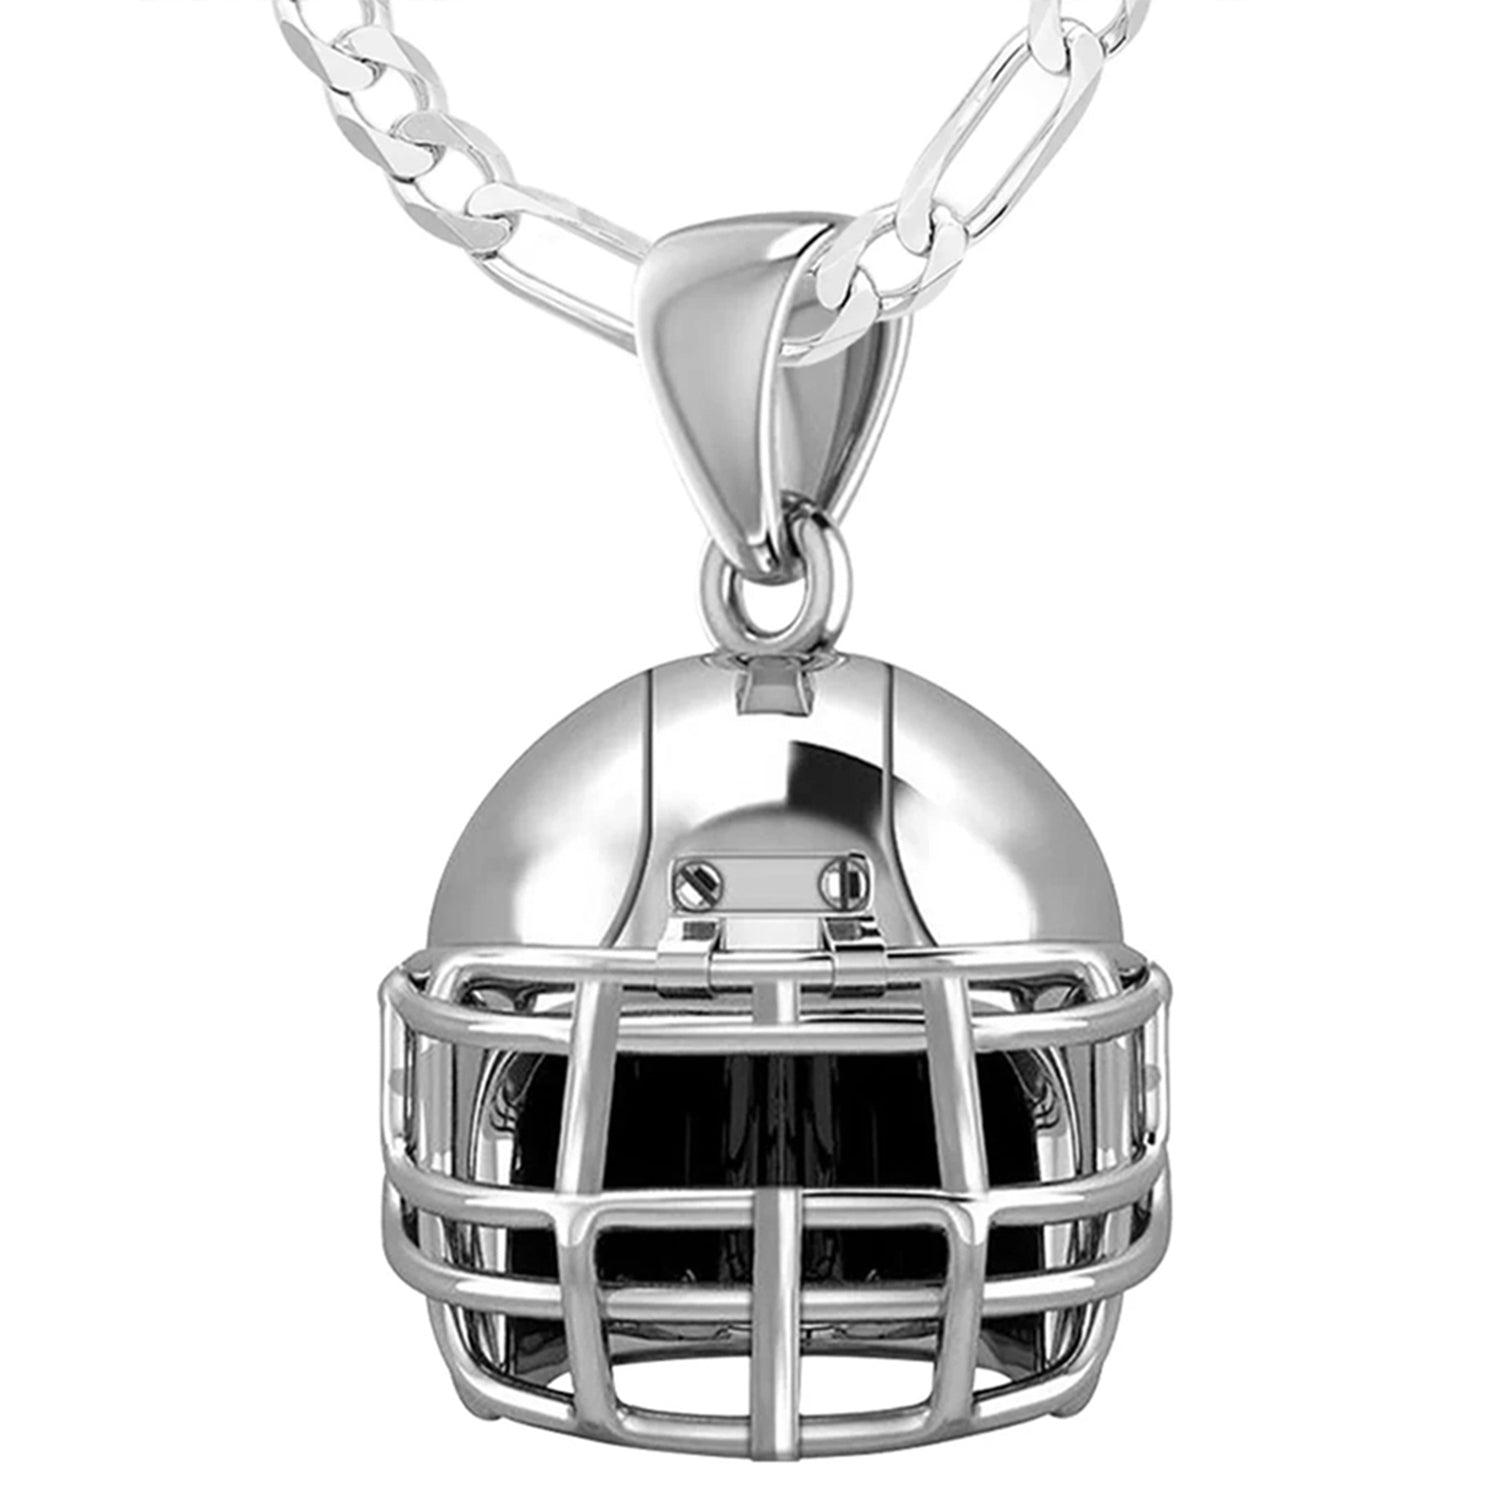 Small 925 Sterling Silver 3D Football Helmet Pendant Necklace, 16.5mm - US Jewels